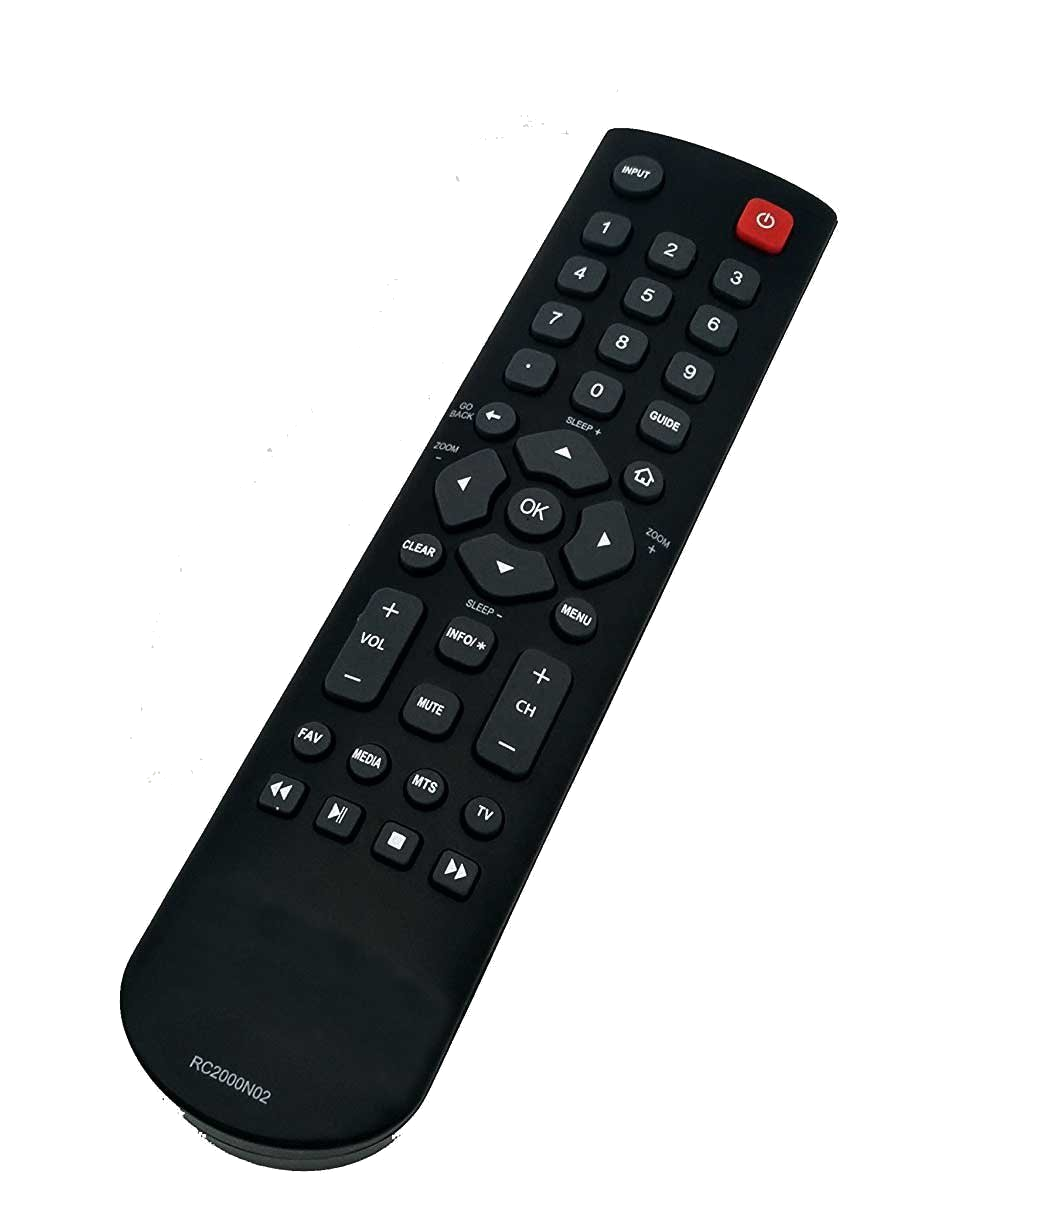 Tcl My Tcl Led Hdtv Remote Control Is Not Working Properly